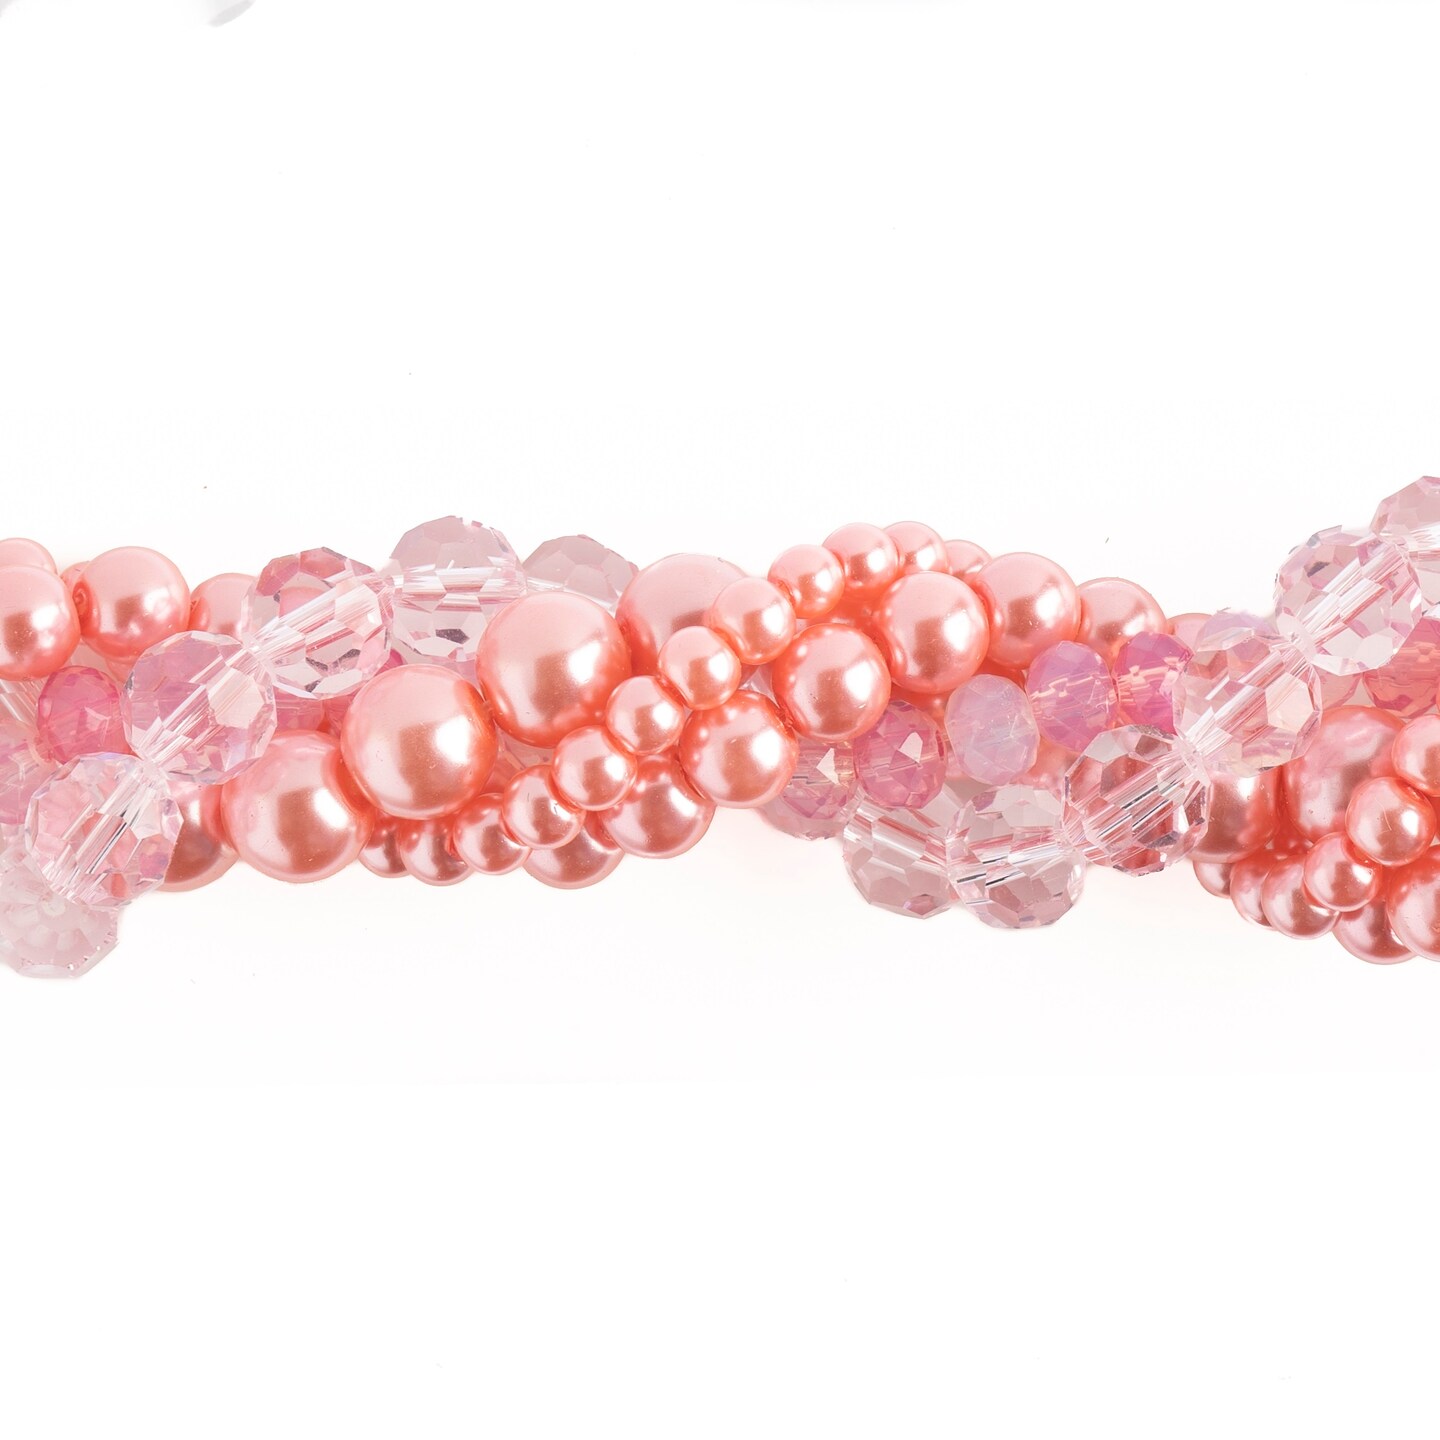 Crystal Lane DIY Waxflower Twisted Glass &#x26; Pearls Beads, 5 Strands